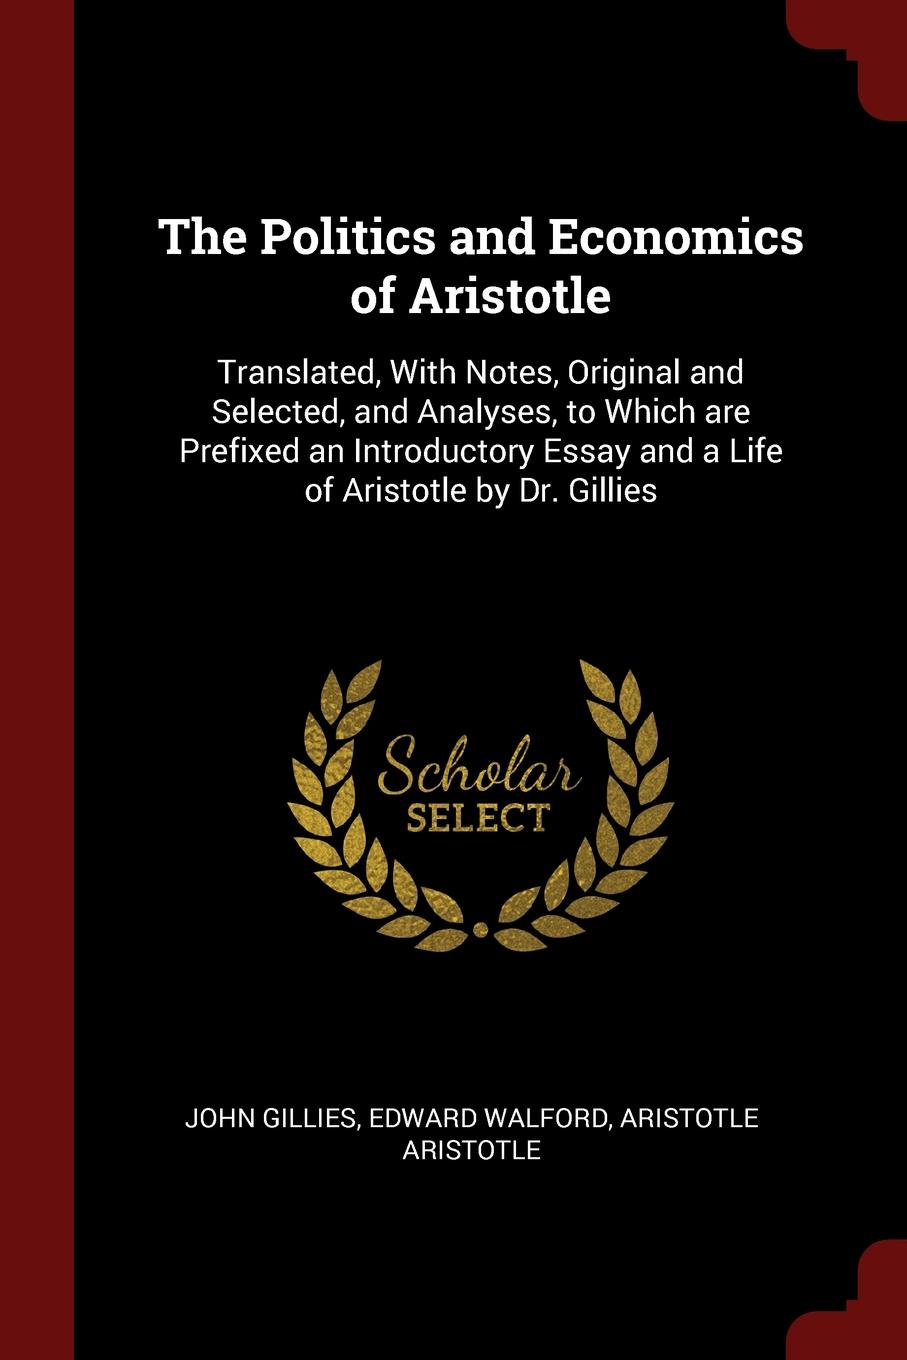 The Politics and Economics of Aristotle. Translated, With Notes, Original and Selected, and Analyses, to Which are Prefixed an Introductory Essay and a Life of Aristotle by Dr. Gillies